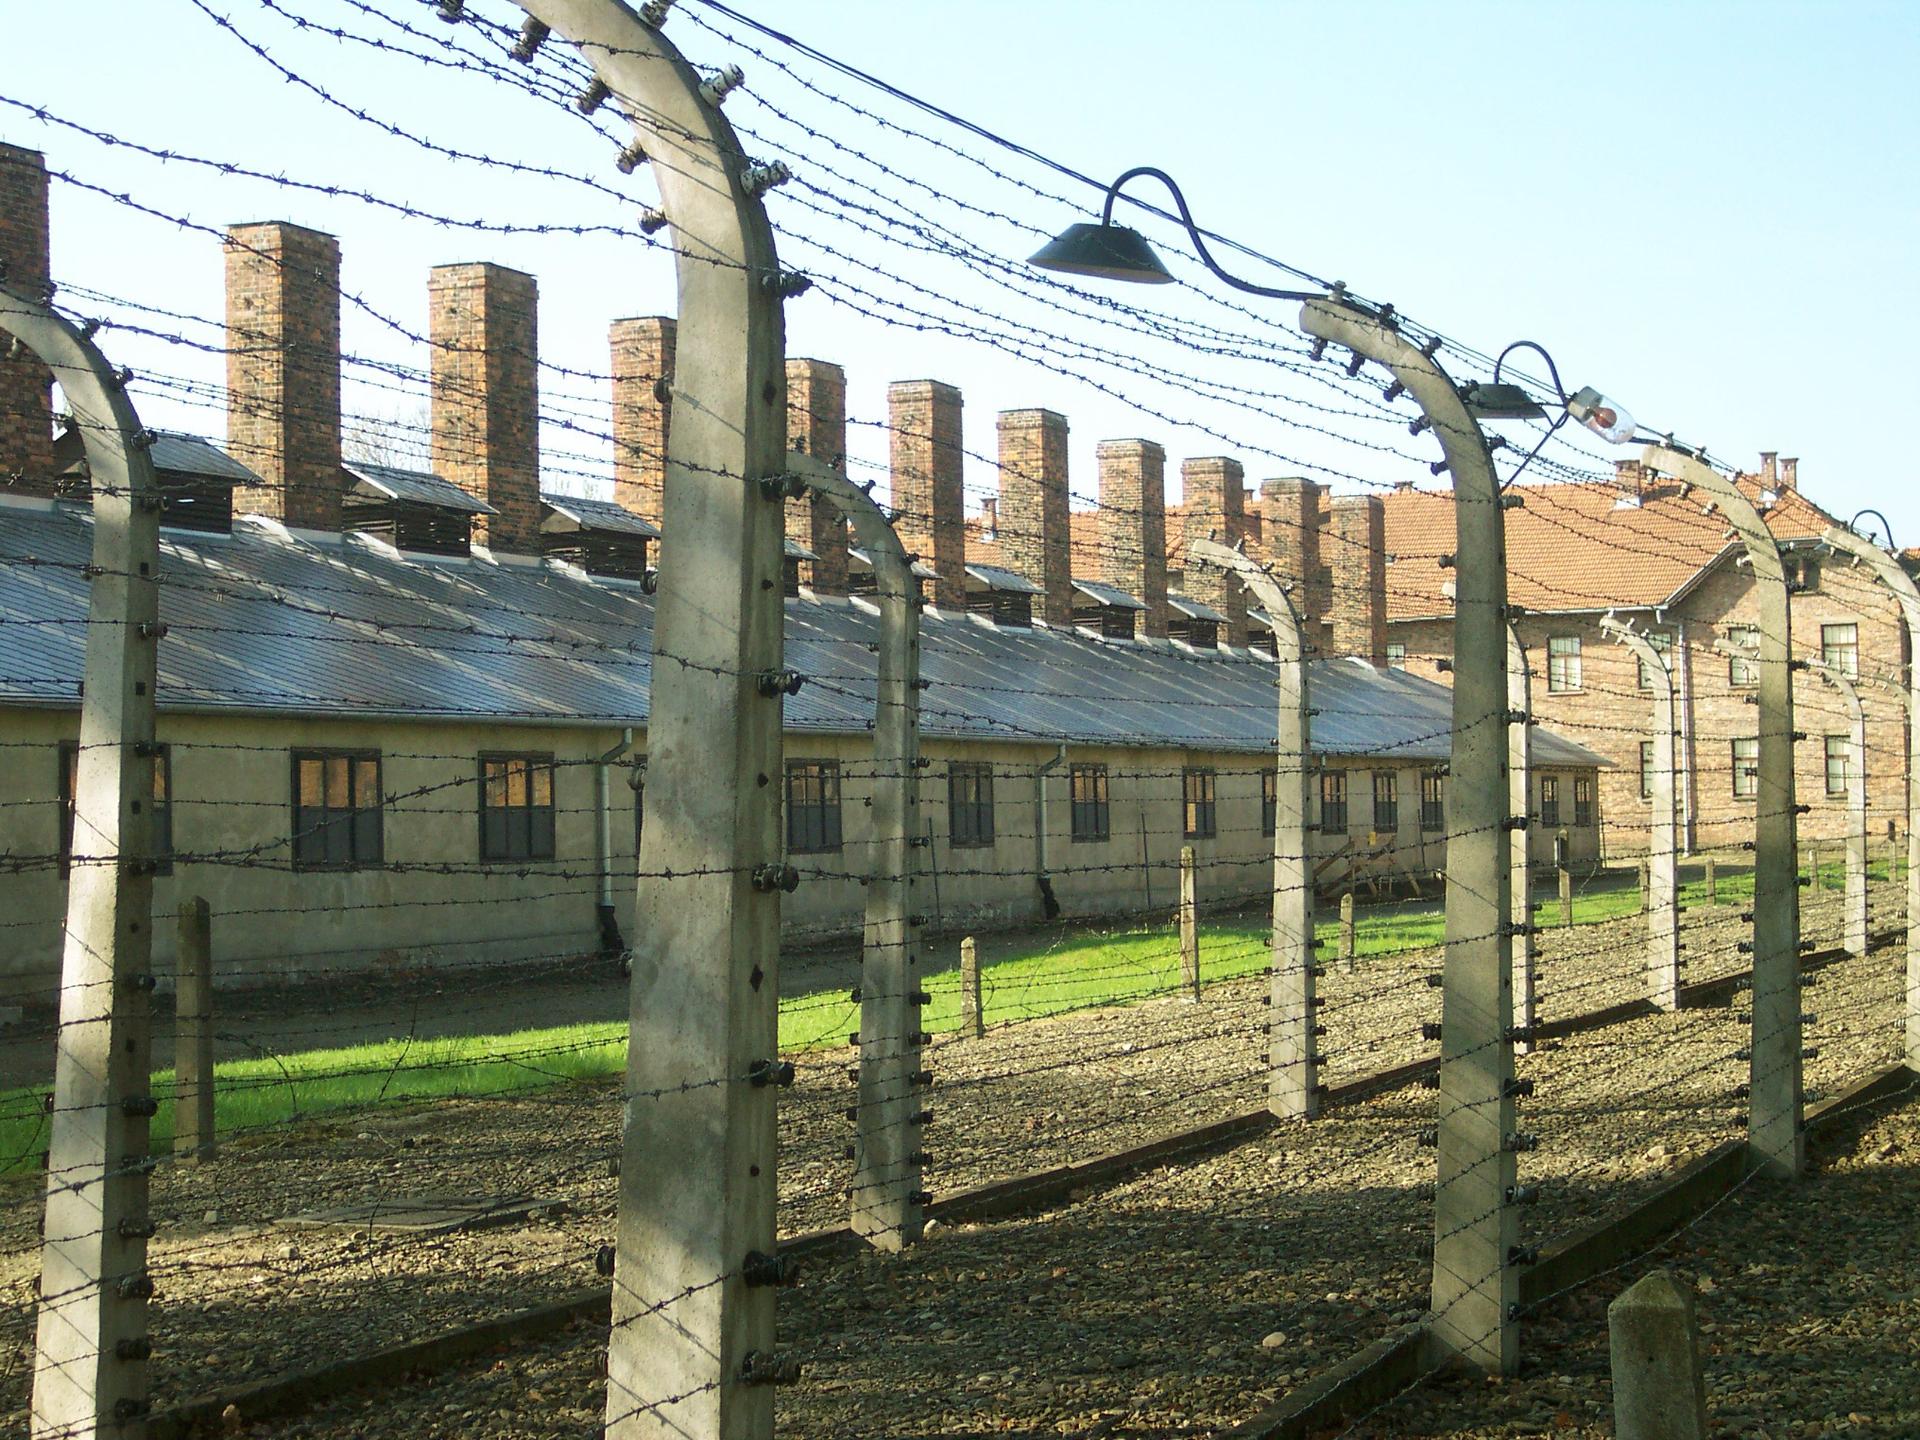 The barbed wire fence surrounding the labor camp at Auschwitz I. Johann Breyer says that he worked here as a guard during World War II and not at the nearby gas chambers at Auschwitz-Birkenau.